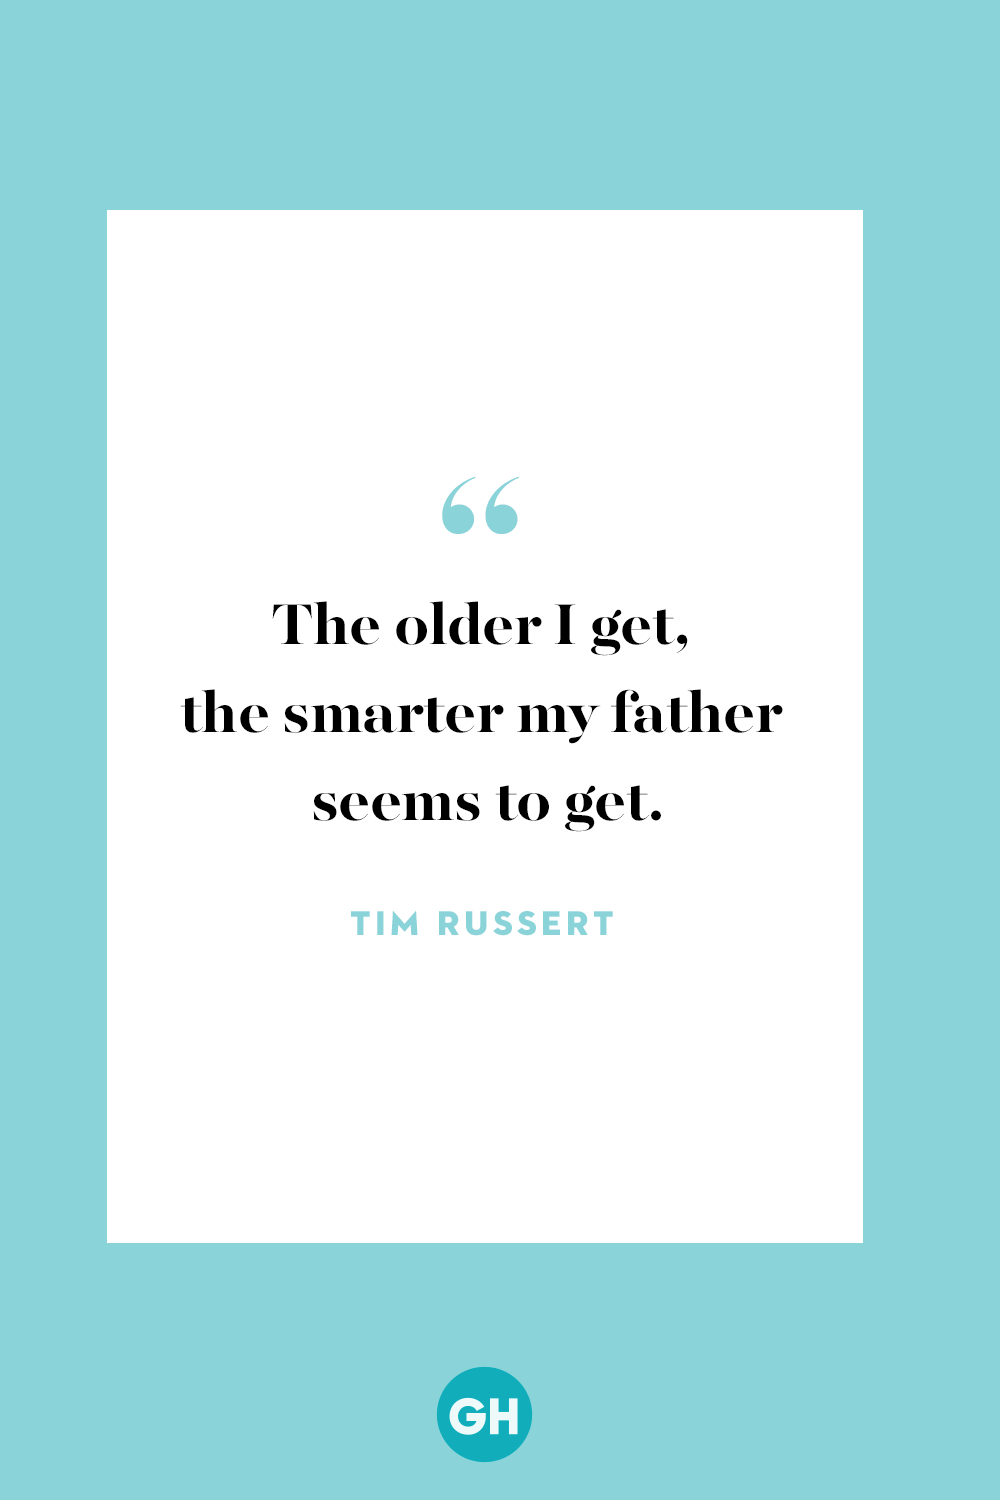 29 Funny Father's Day Quotes - Quotes About Fatherhood From Celebrity Dads